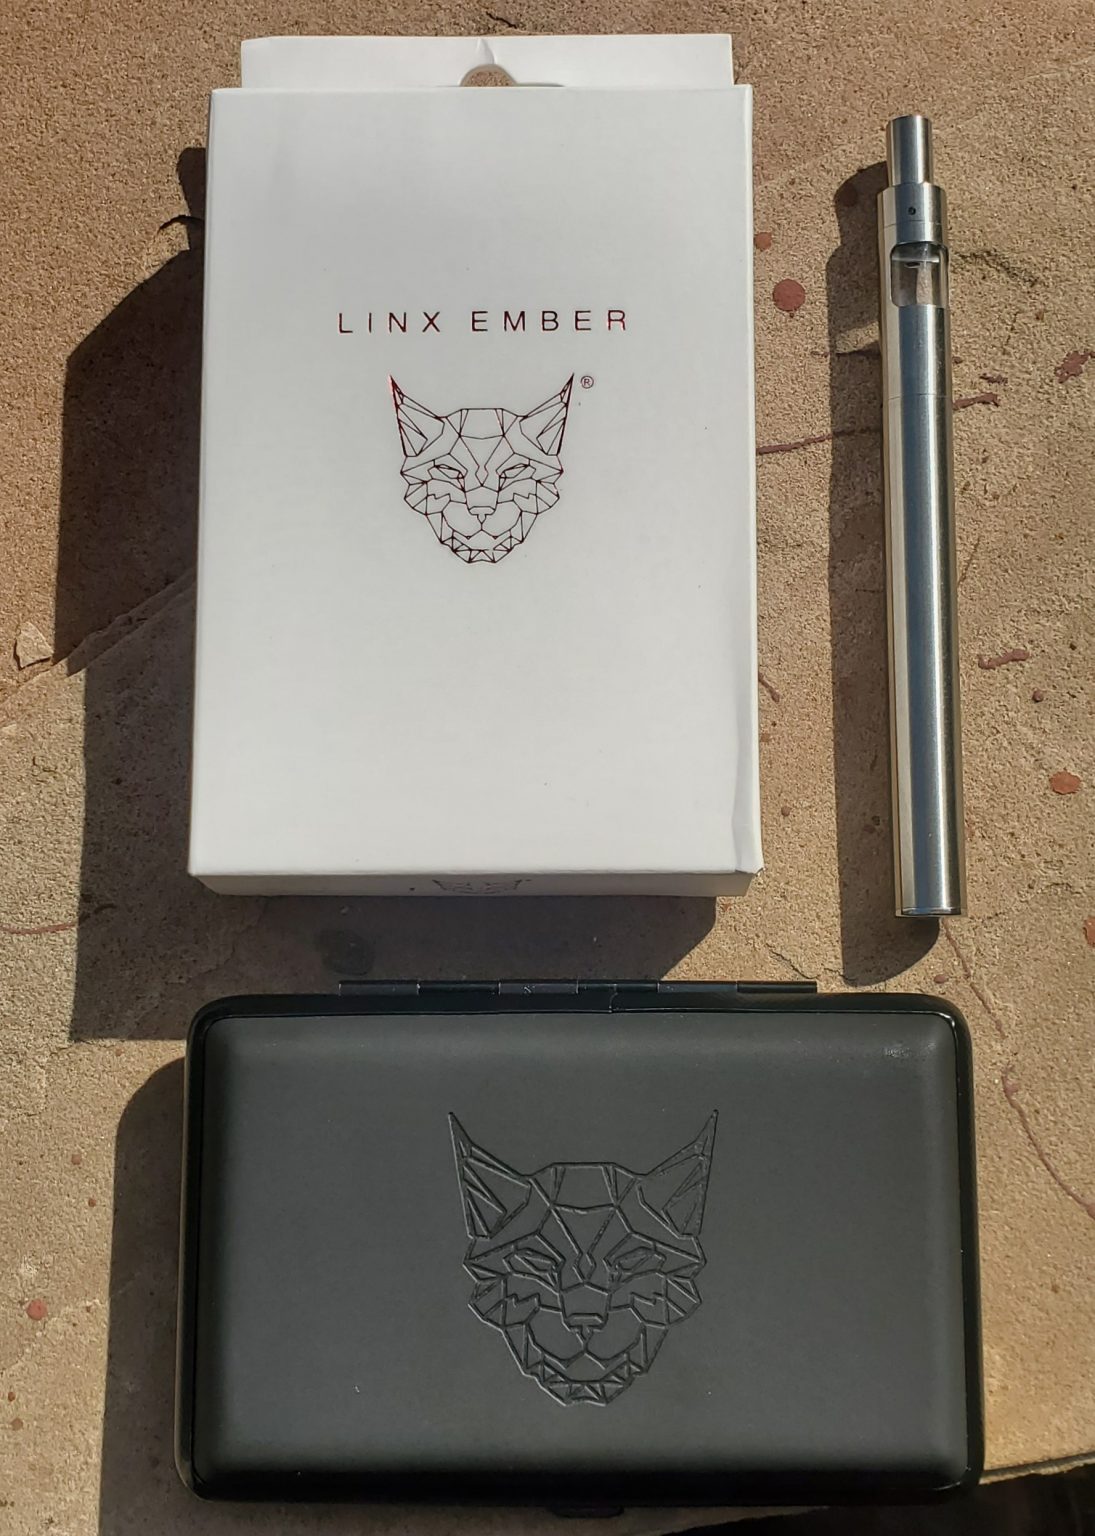 Linx Ember Wax Pen Review - Great Battery and a Very Efficient Design